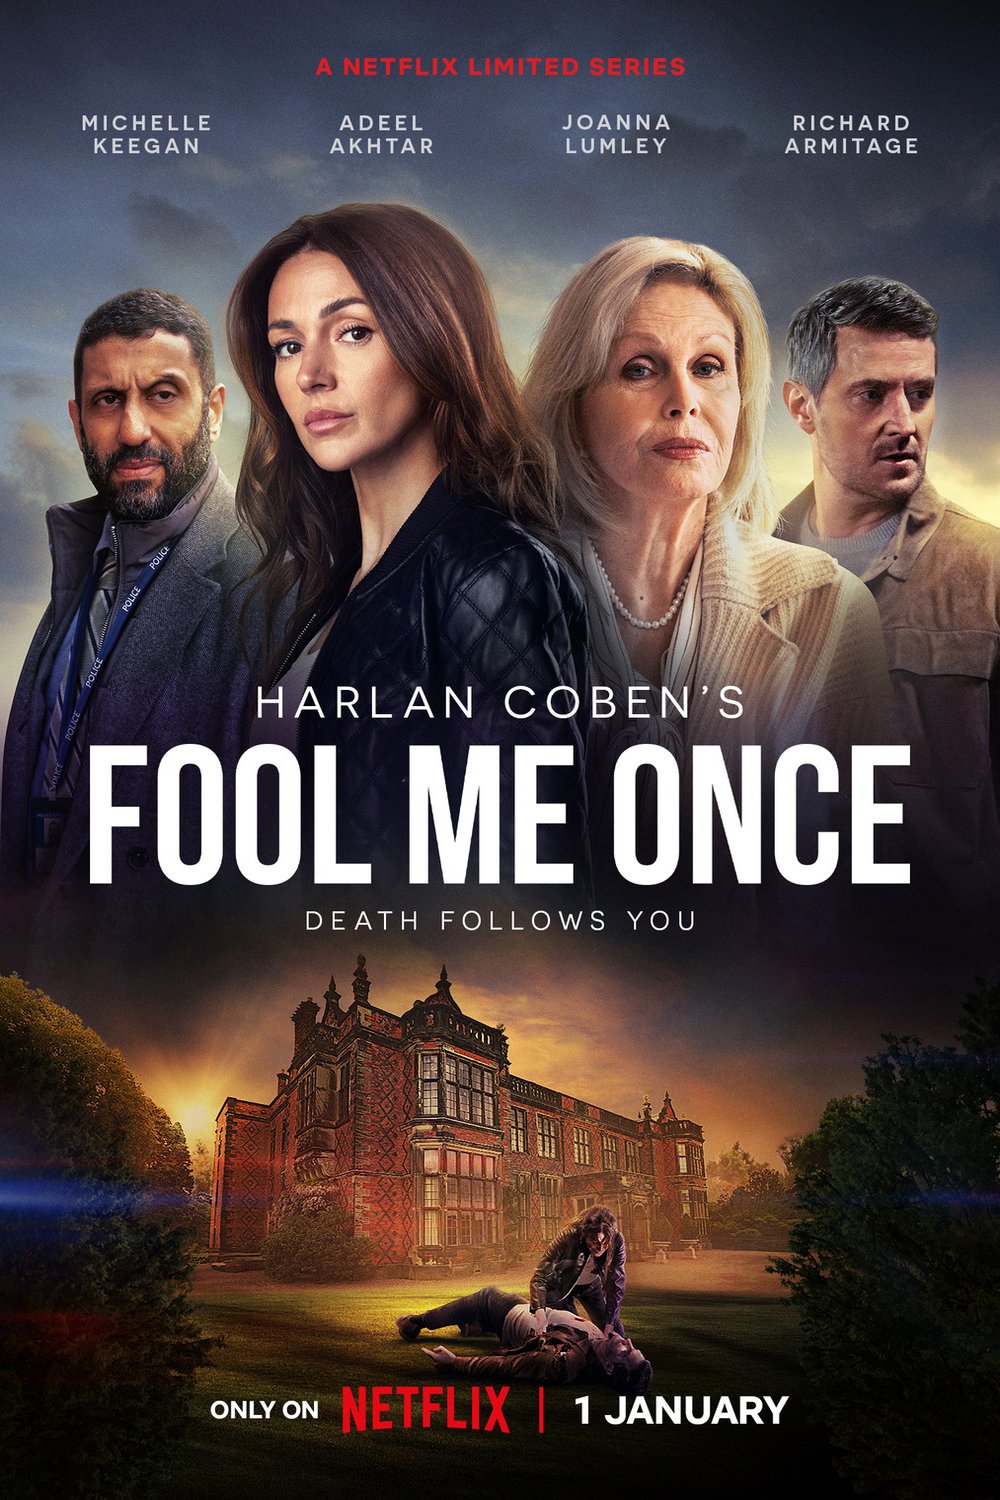 Poster of the movie Fool Me Once